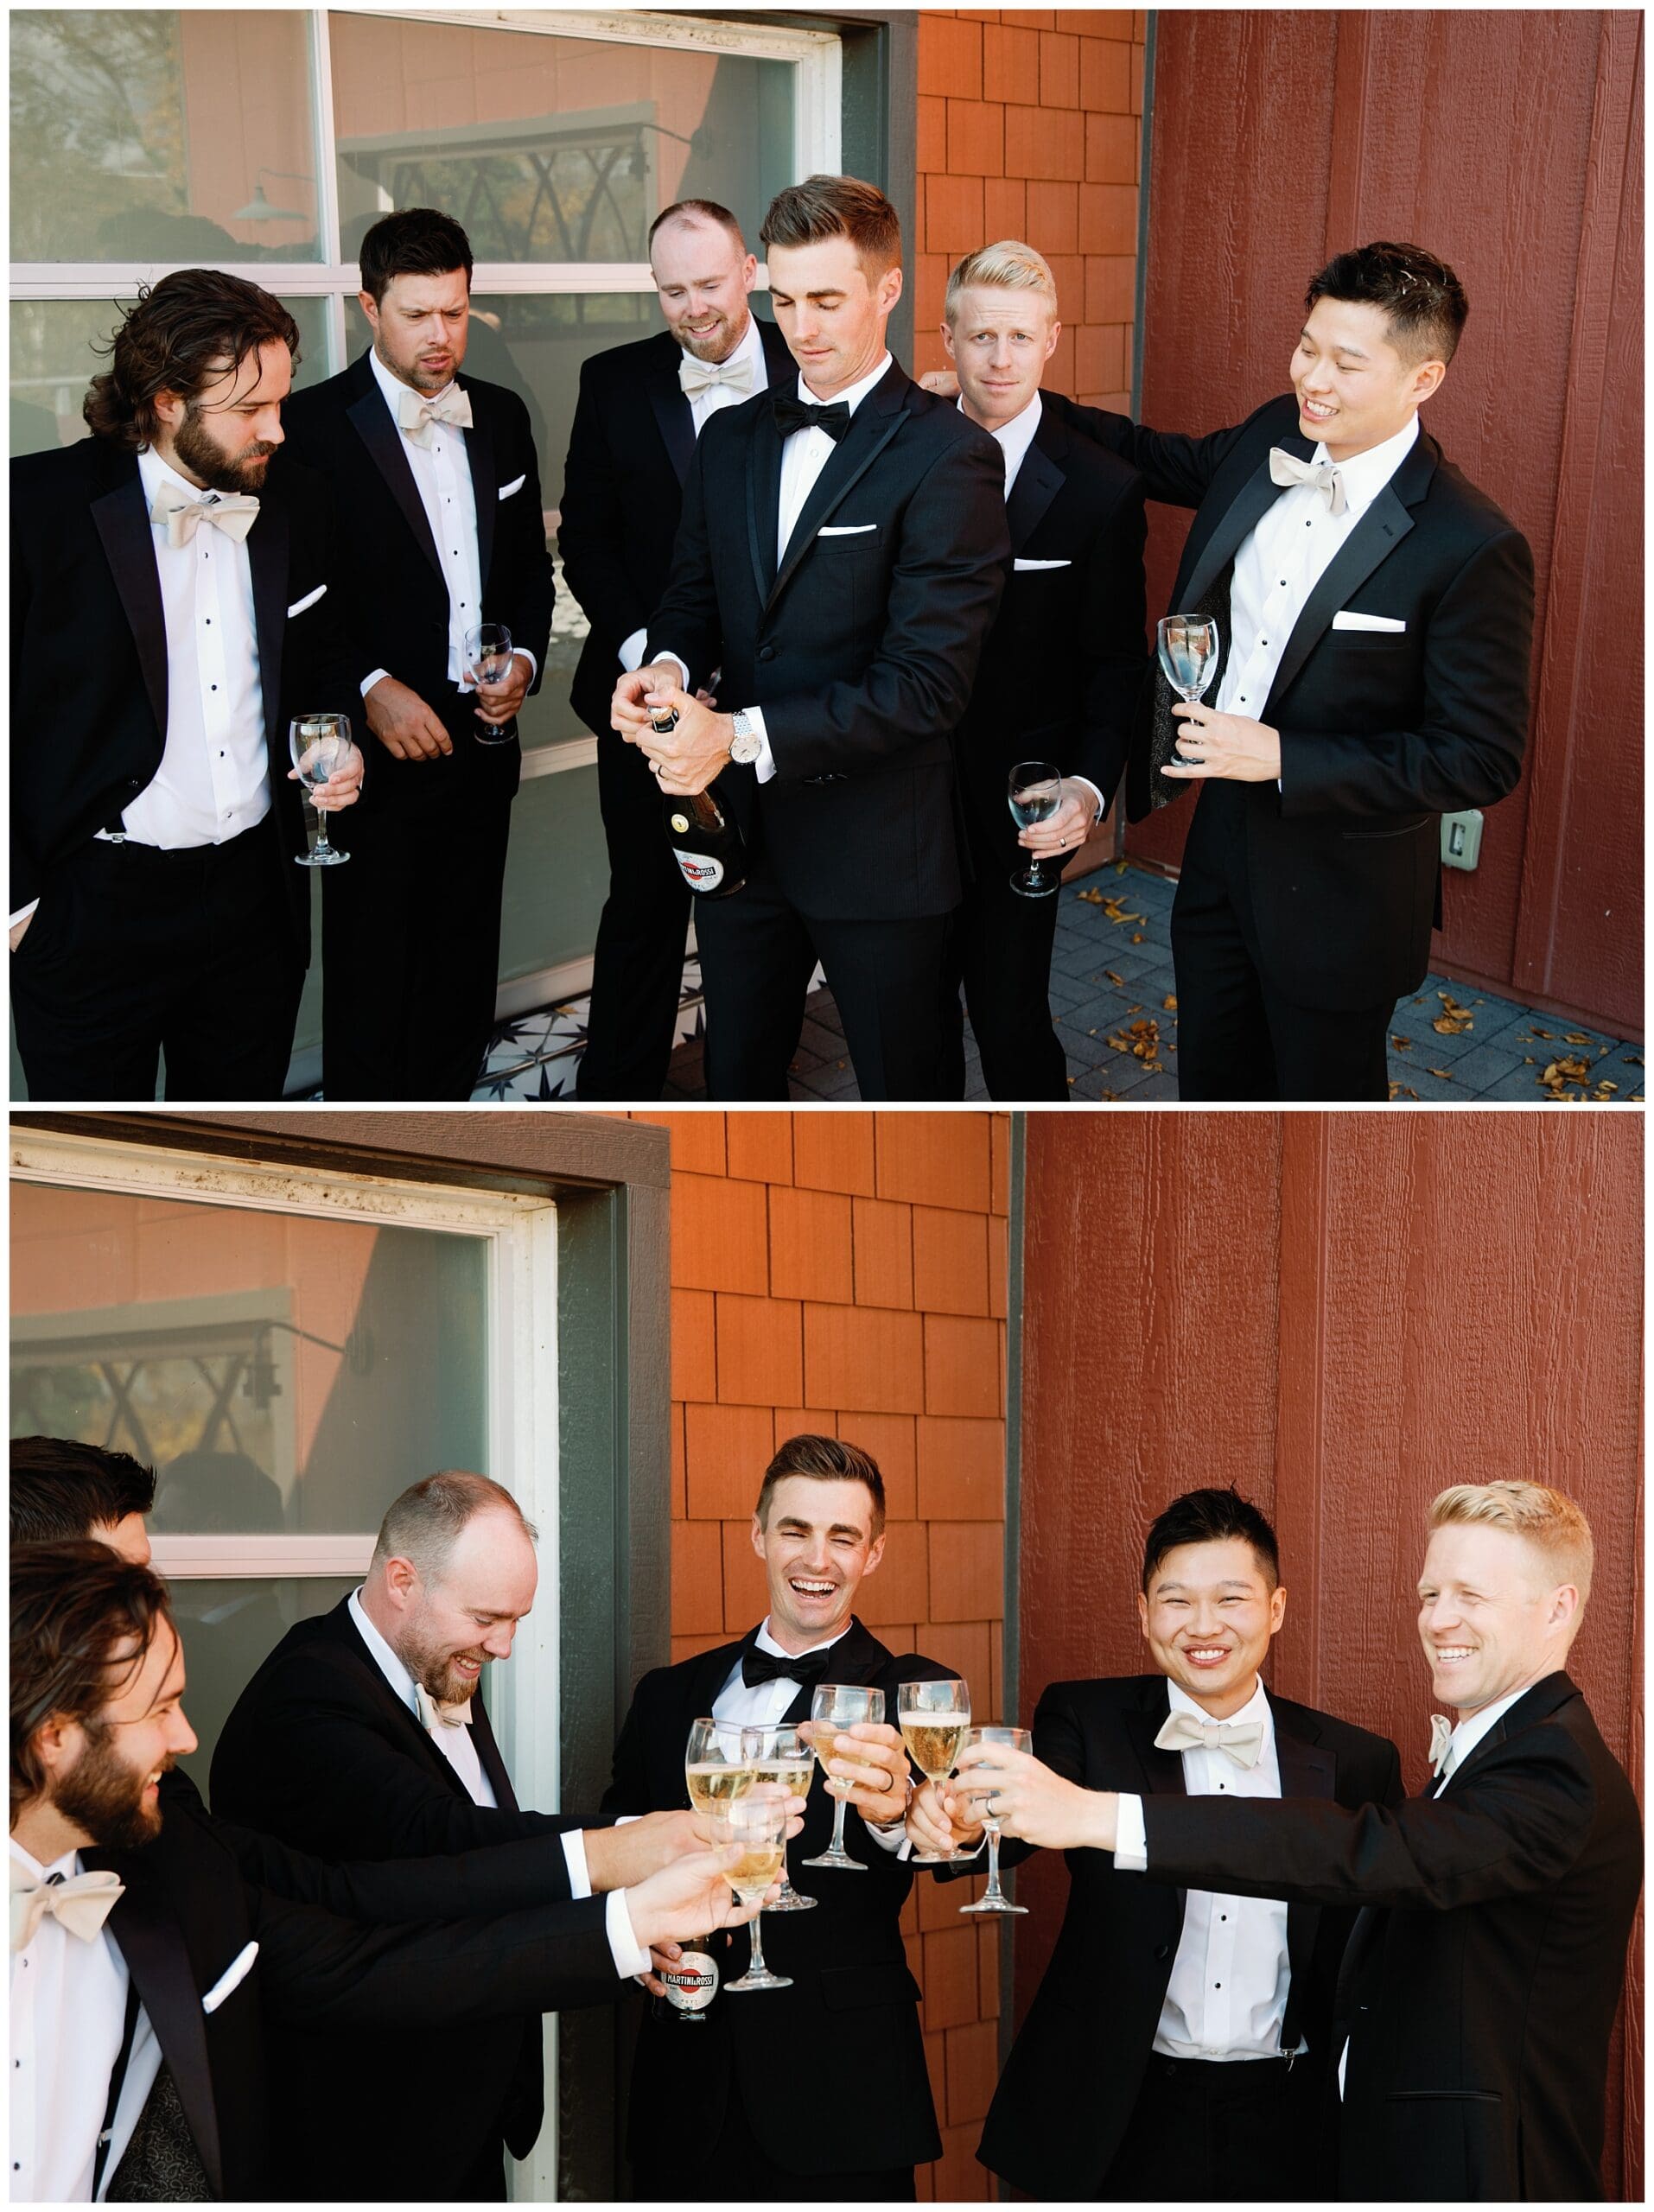 A group of men in tuxedos toasting with wine glasses at a fall wedding.